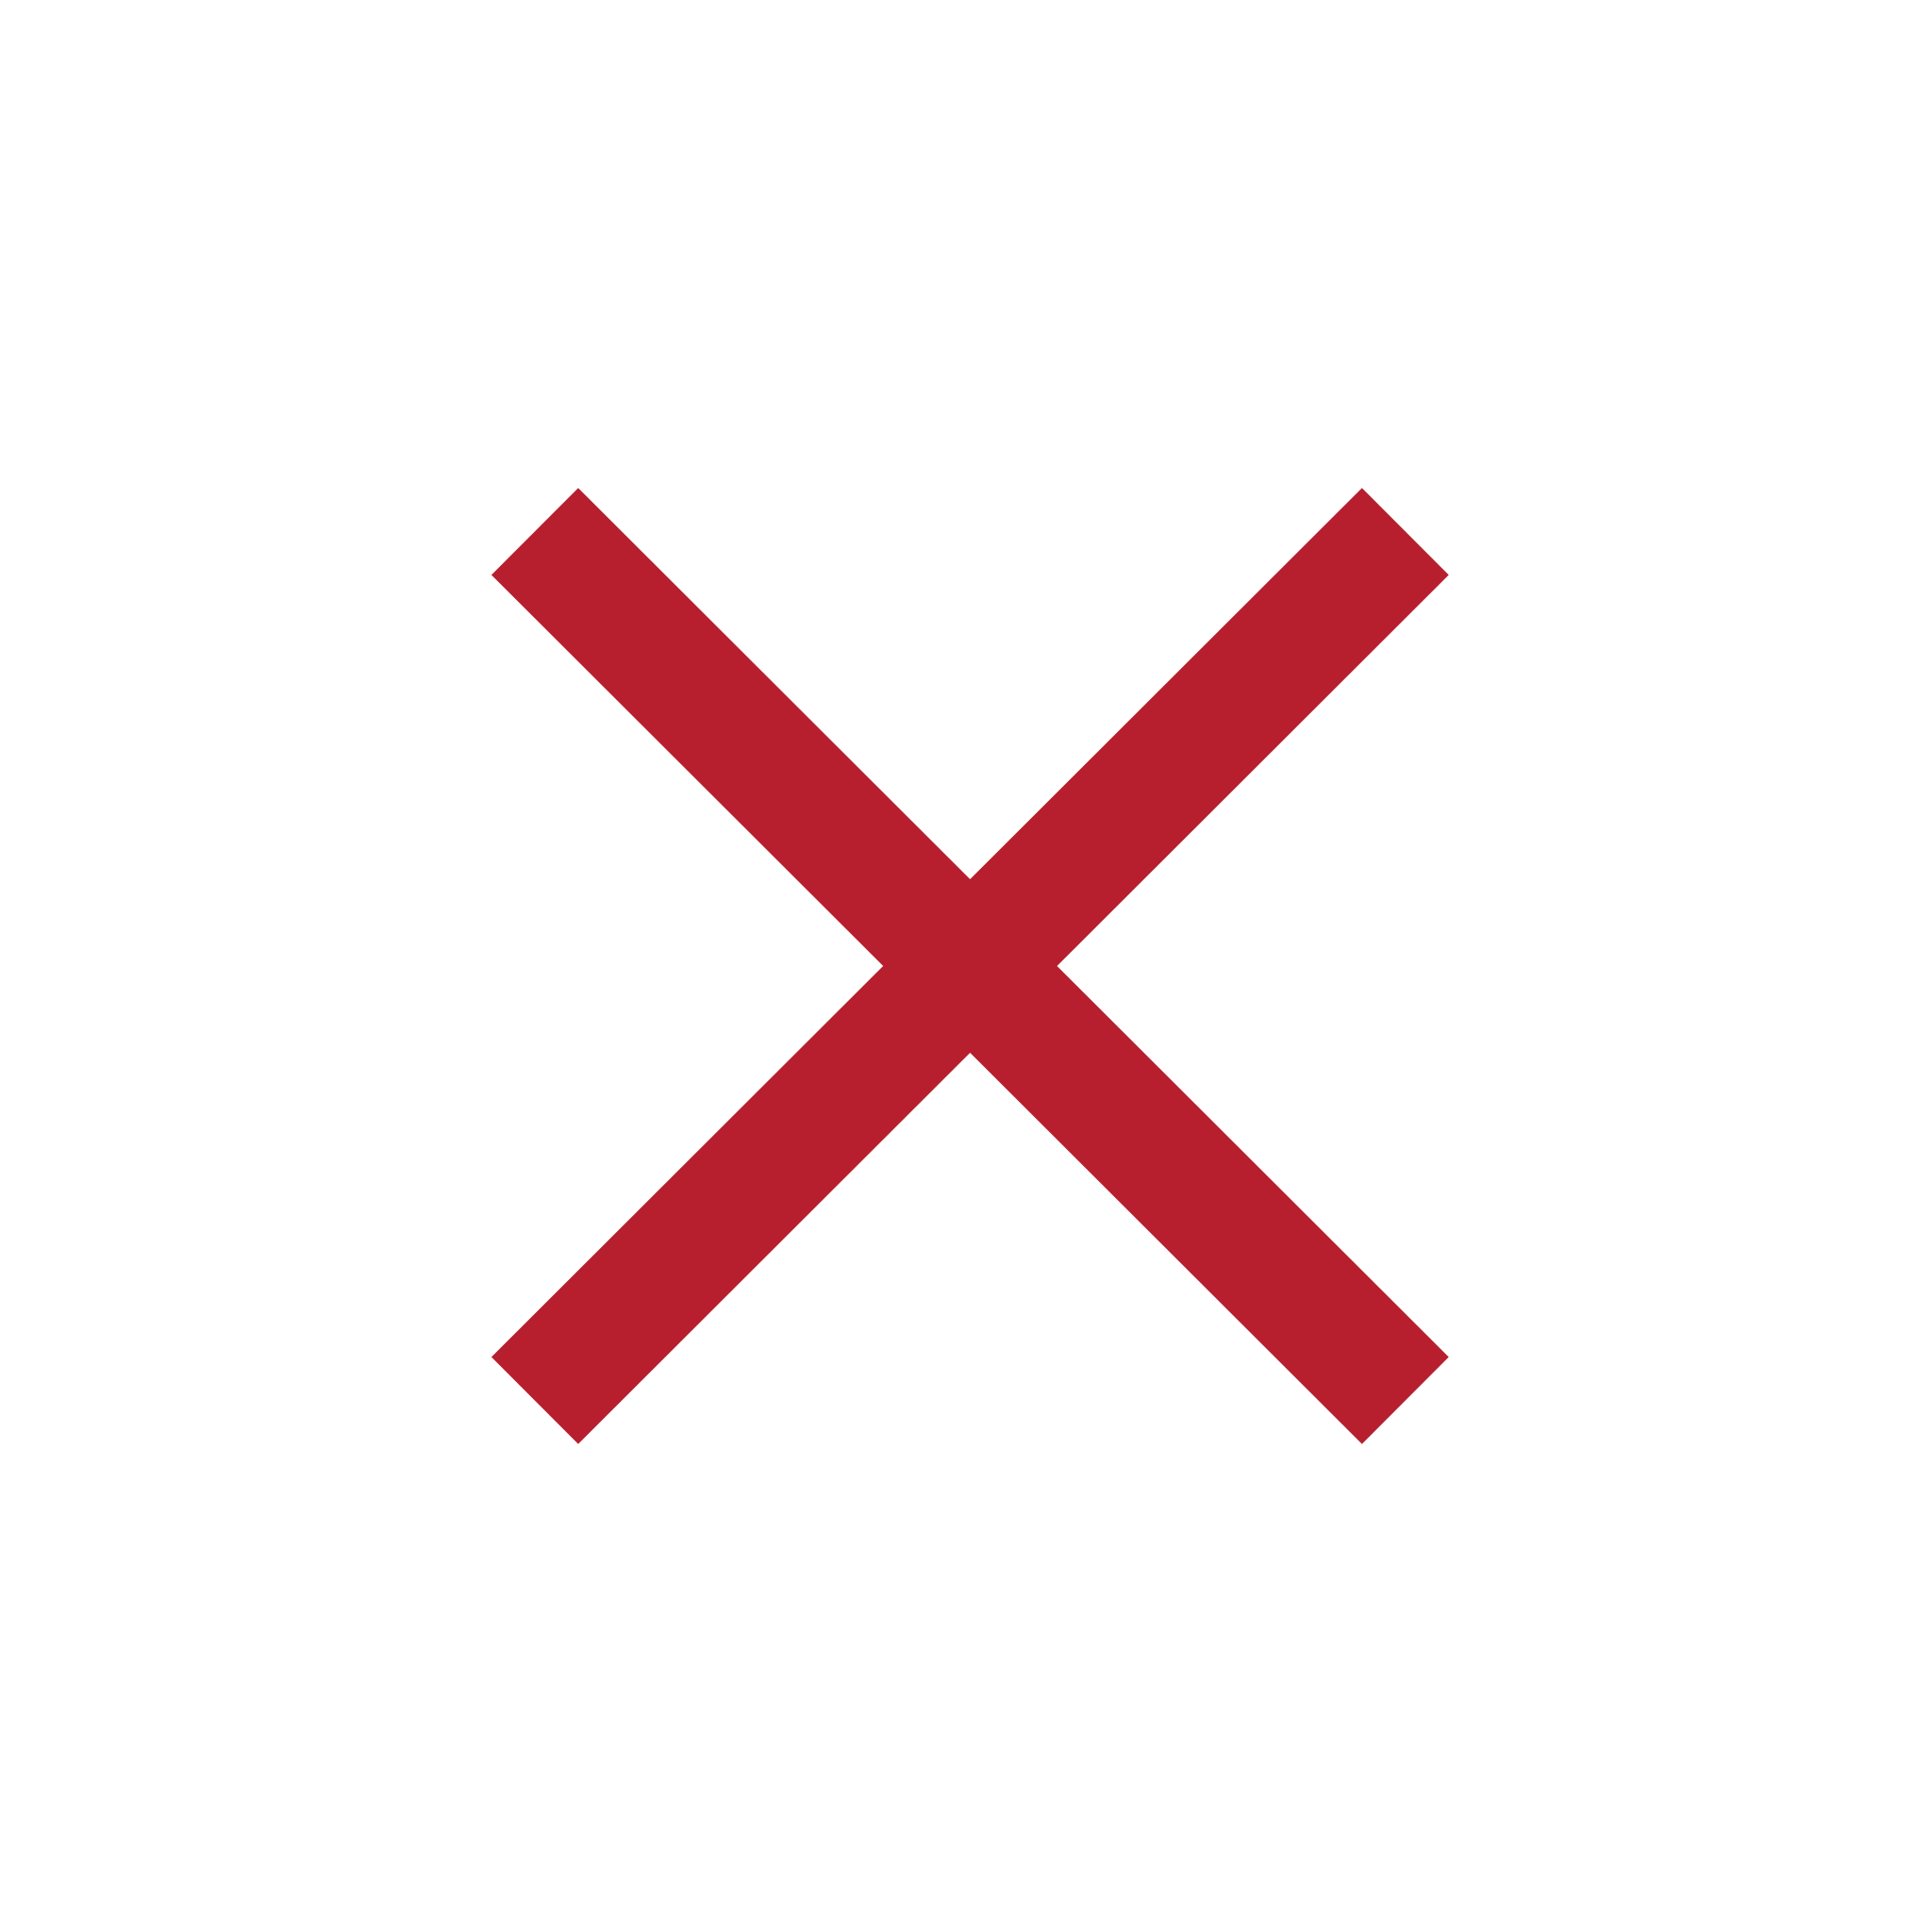 File:Red X.svg - Wikimedia Commons